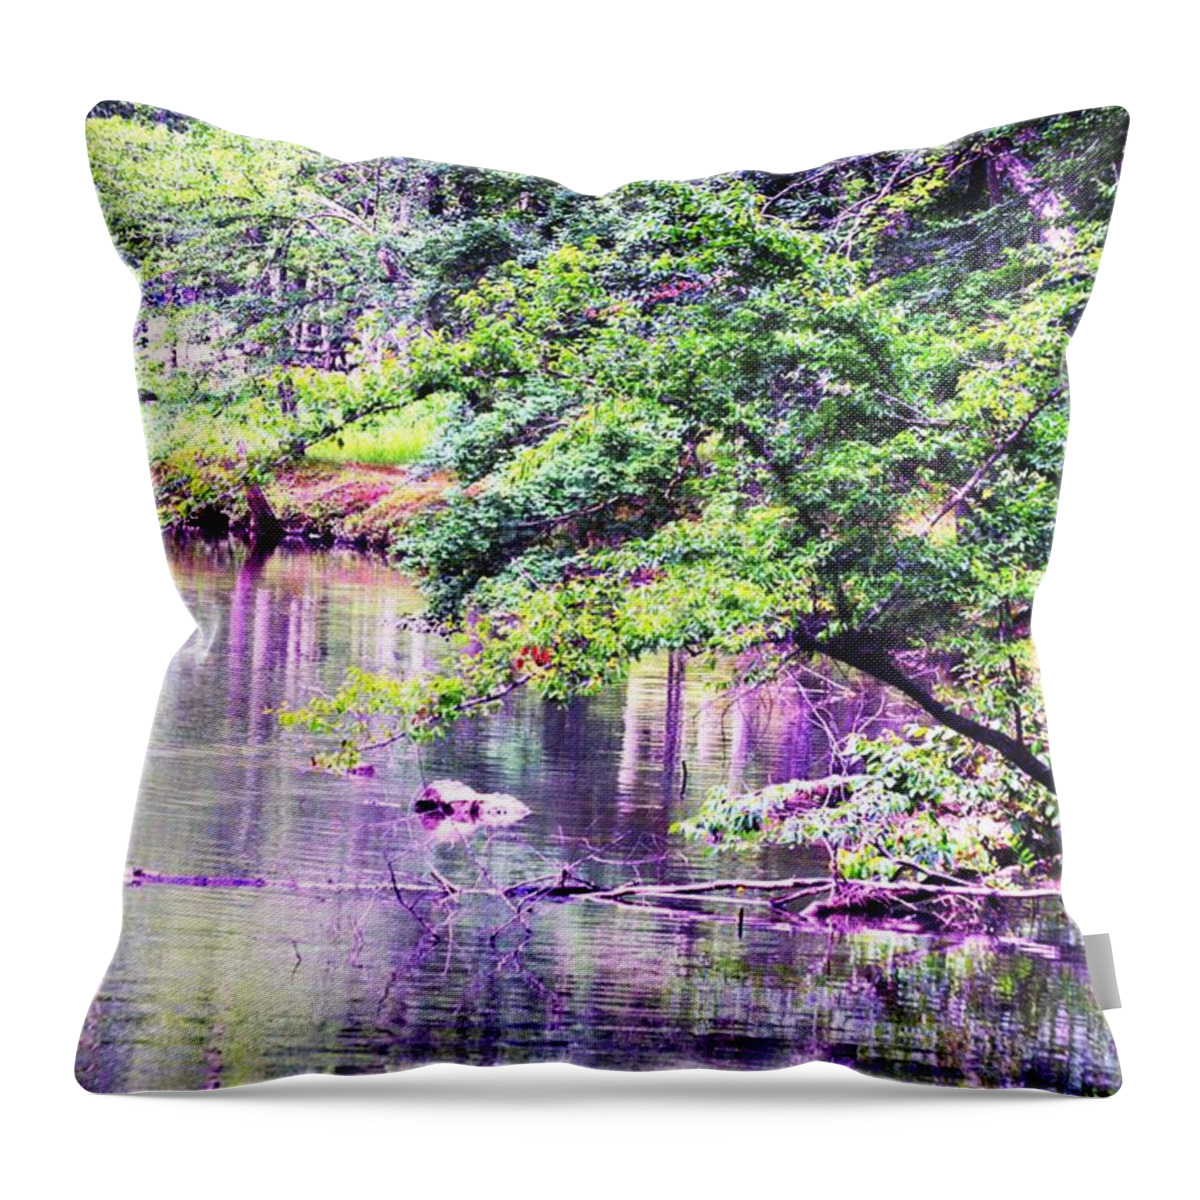 Summer Throw Pillow featuring the photograph A Summer's Afternoon by Maria Urso